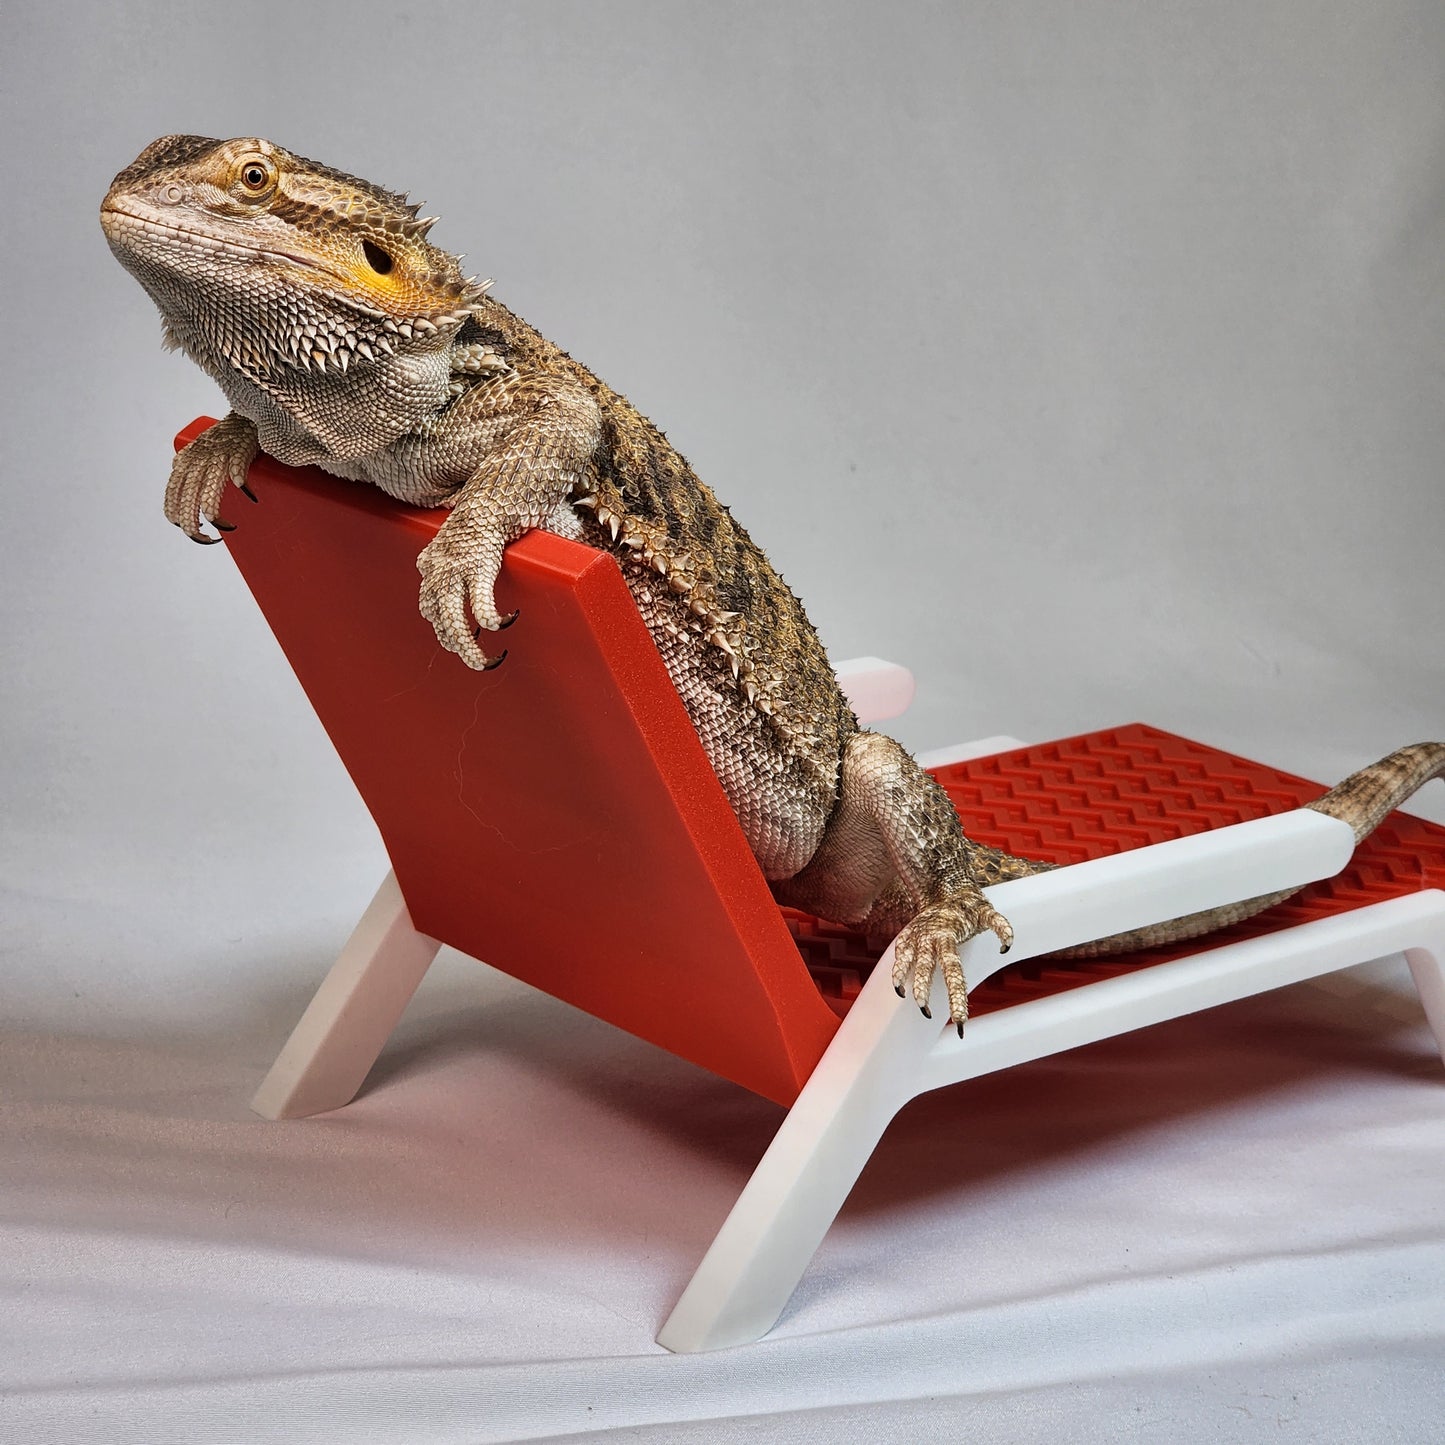 Reptile Lounging Chair 2.0 | Bearded dragon and leopard gecko hammock lounger and basking spot, Bearded dragon furniture decor